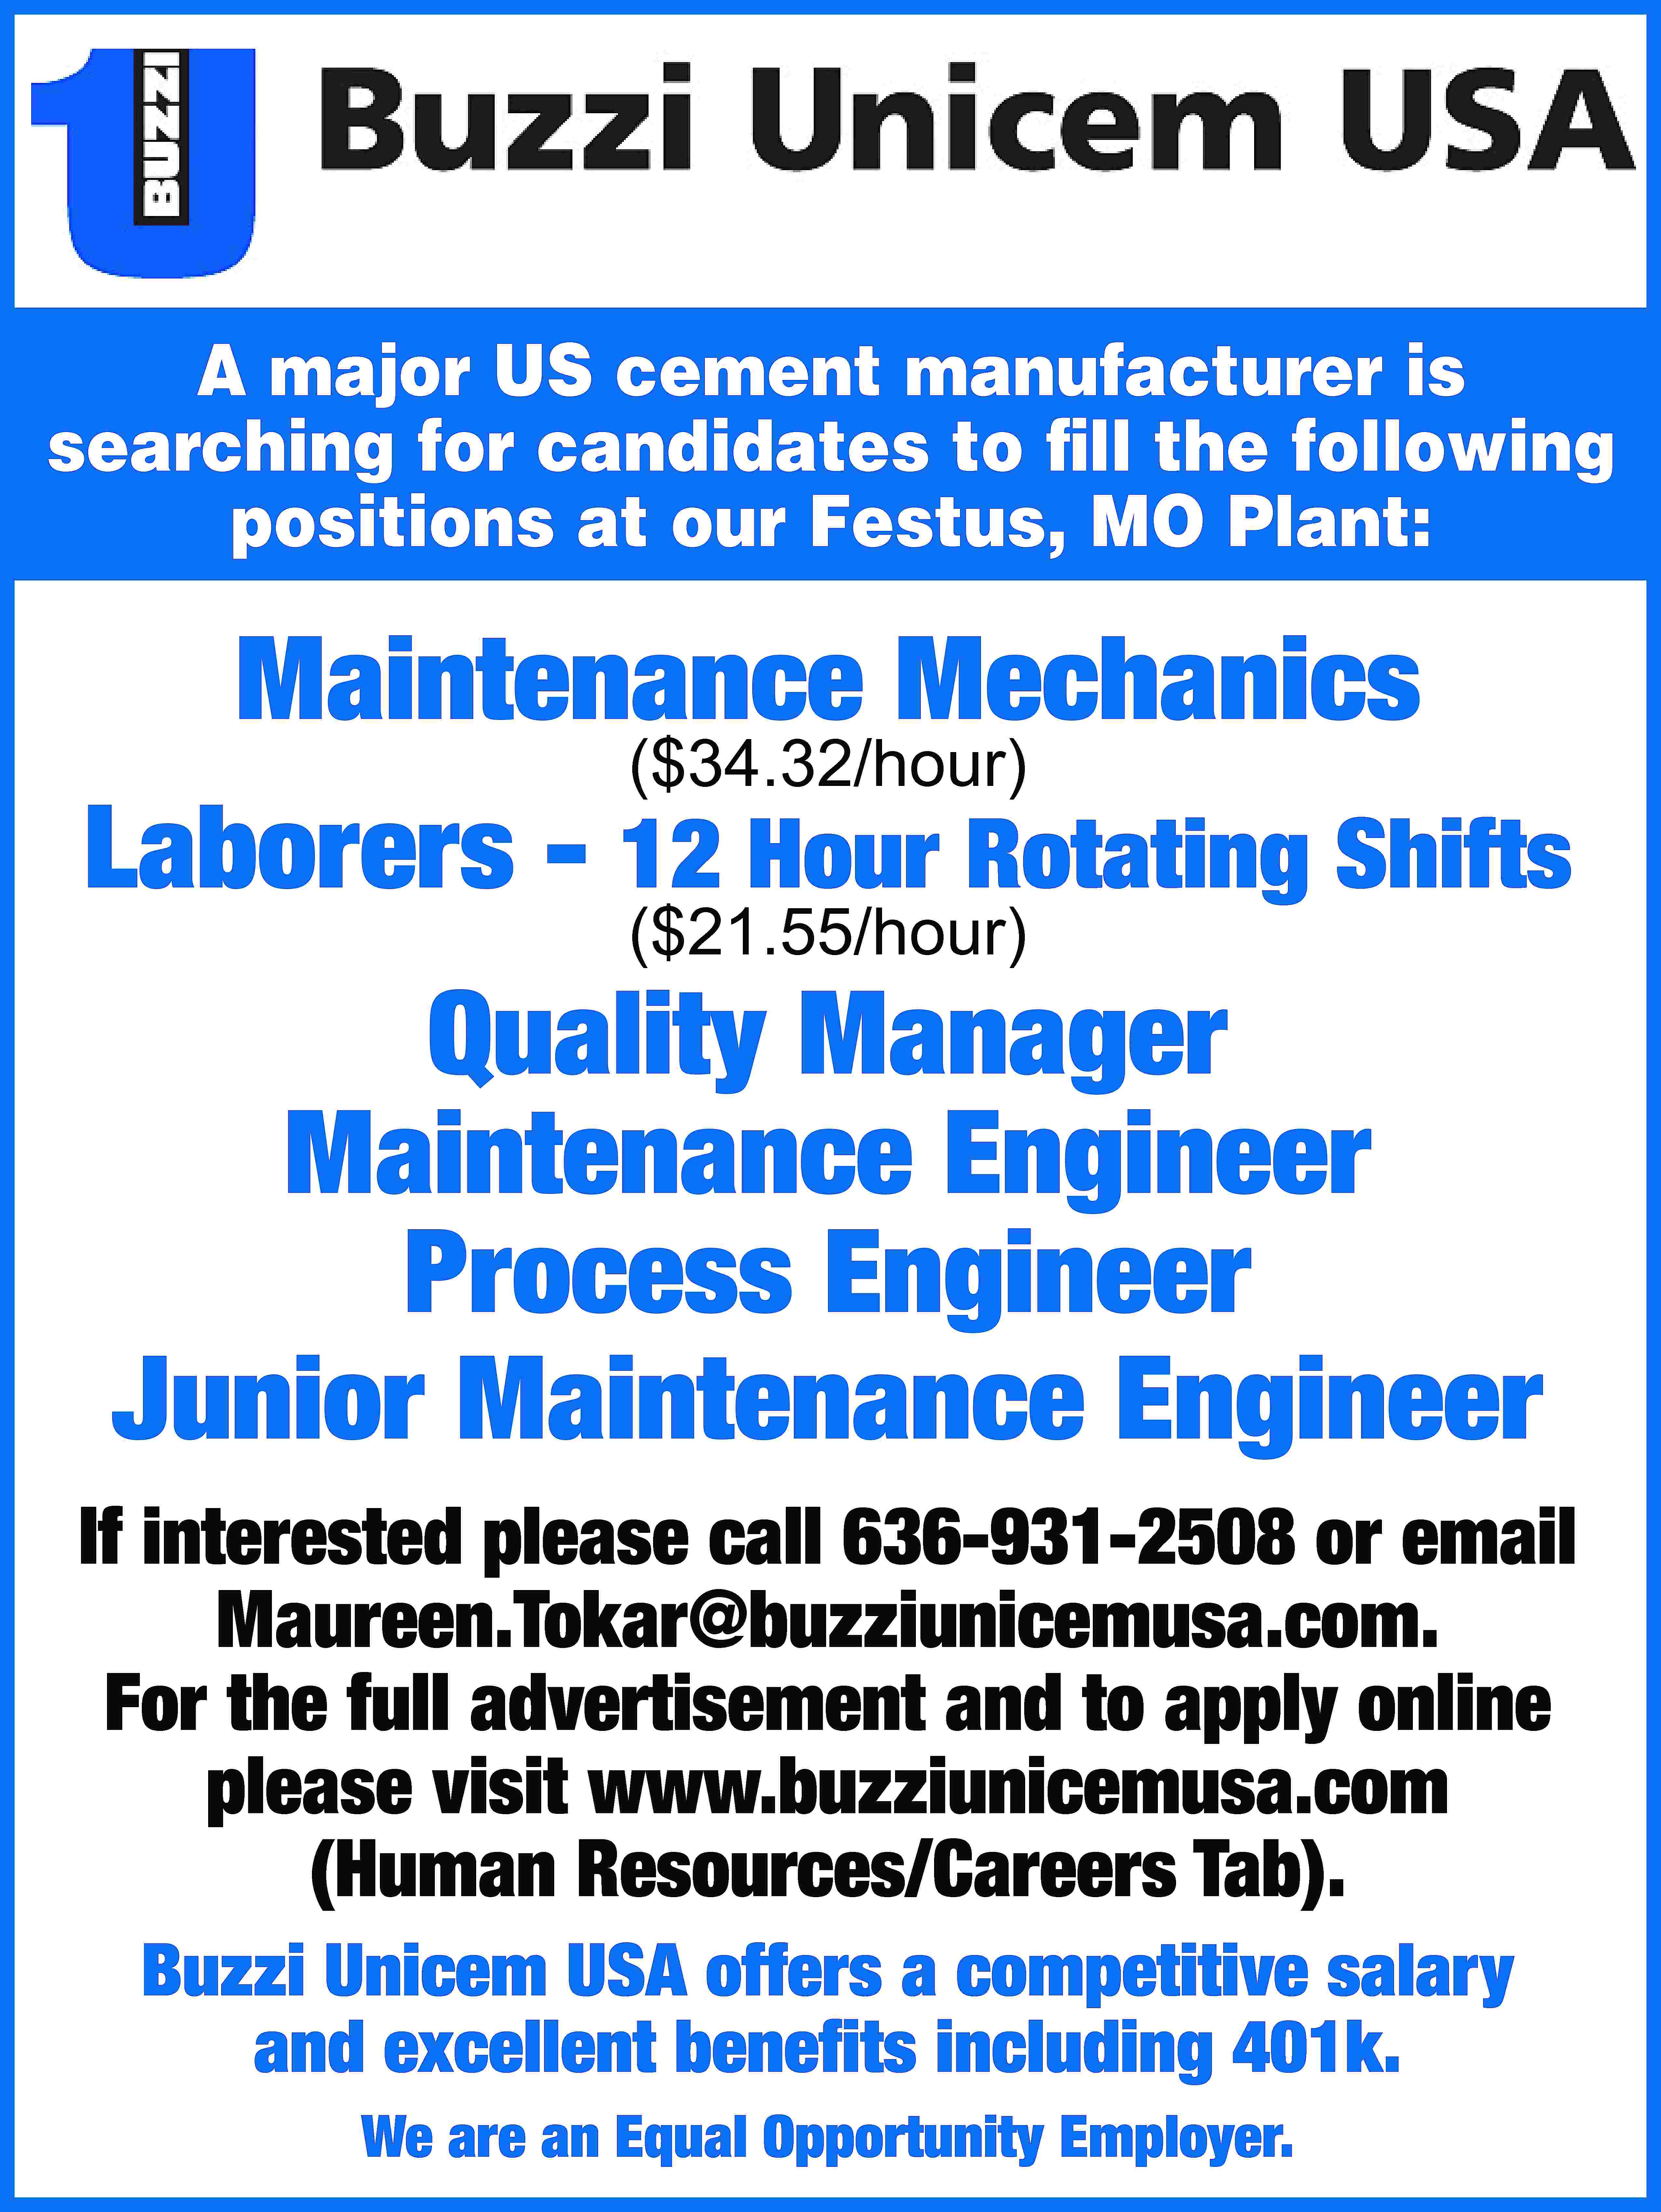 A major US cement manufacturer  A major US cement manufacturer is searching for candidates to fill the following positions at our Festus, MO Plant: Maintenance Mechanics ($34.32/hour) Laborers - 12 Hour Rotating Shifts ($21.55/hour) Quality Manager Maintenance Engineer Process Engineer Junior Maintenance Engineer If interested please call 636-931-2508 or email Maureen.Tokar@buzziunicemusa.com. For the full advertisement and to apply online please visit www.buzziunicemusa.com (Human Resources/Careers Tab). Buzzi Unicem USA offers a competitive salary and excellent benefits including 401k. We are an Equal Opportunity Employer.